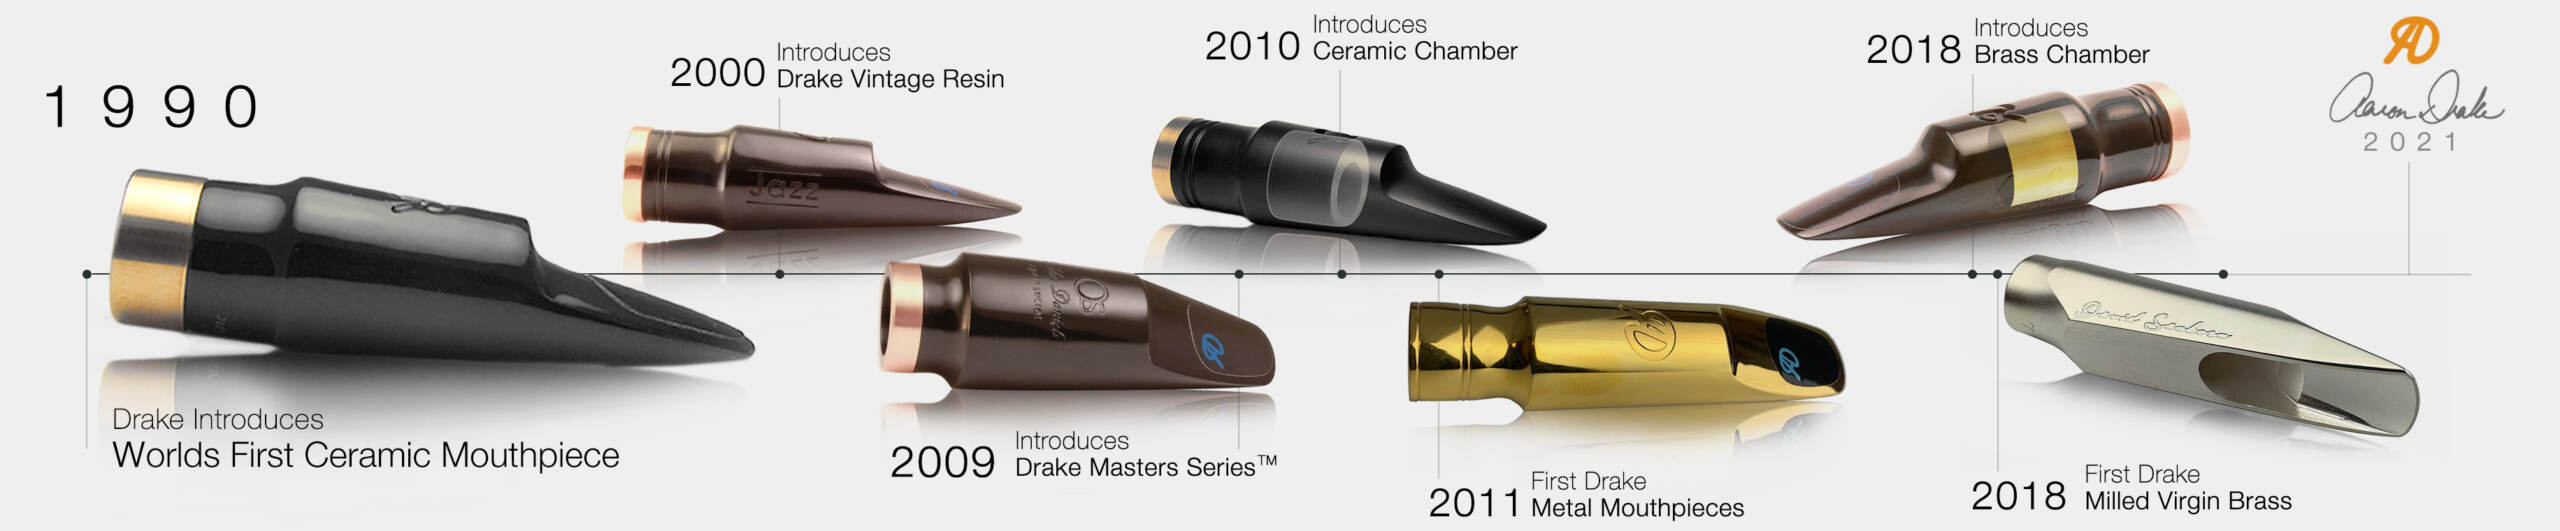 Drake Saxophone Mouthpiece timeline for product home page